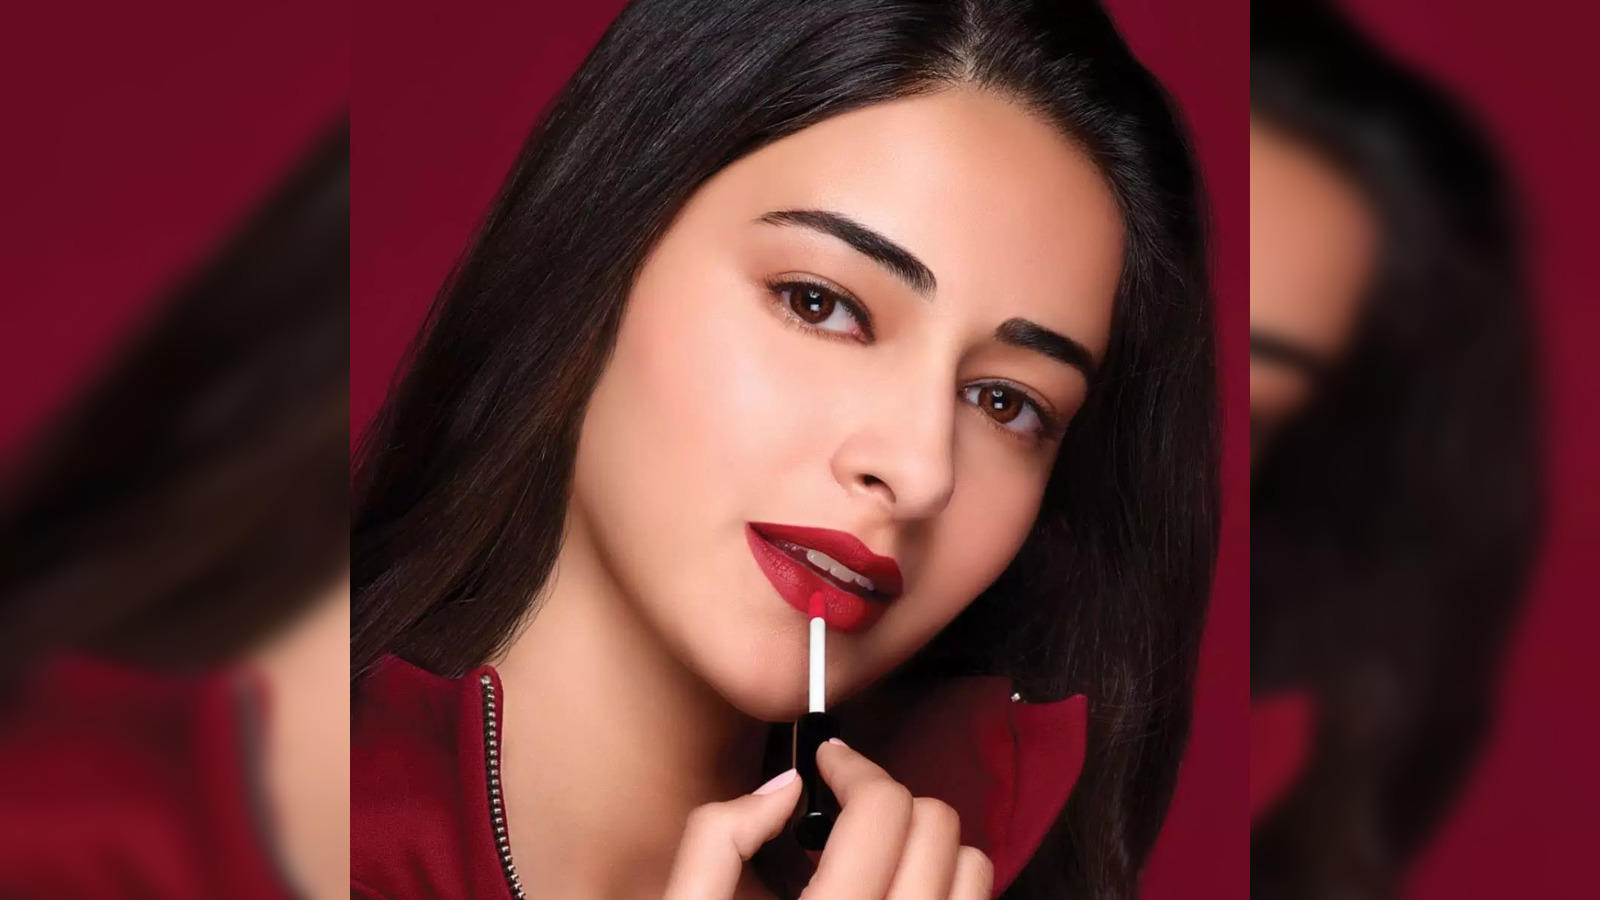 The SUGAR Edit: Red lipsticks that suit all skin tones